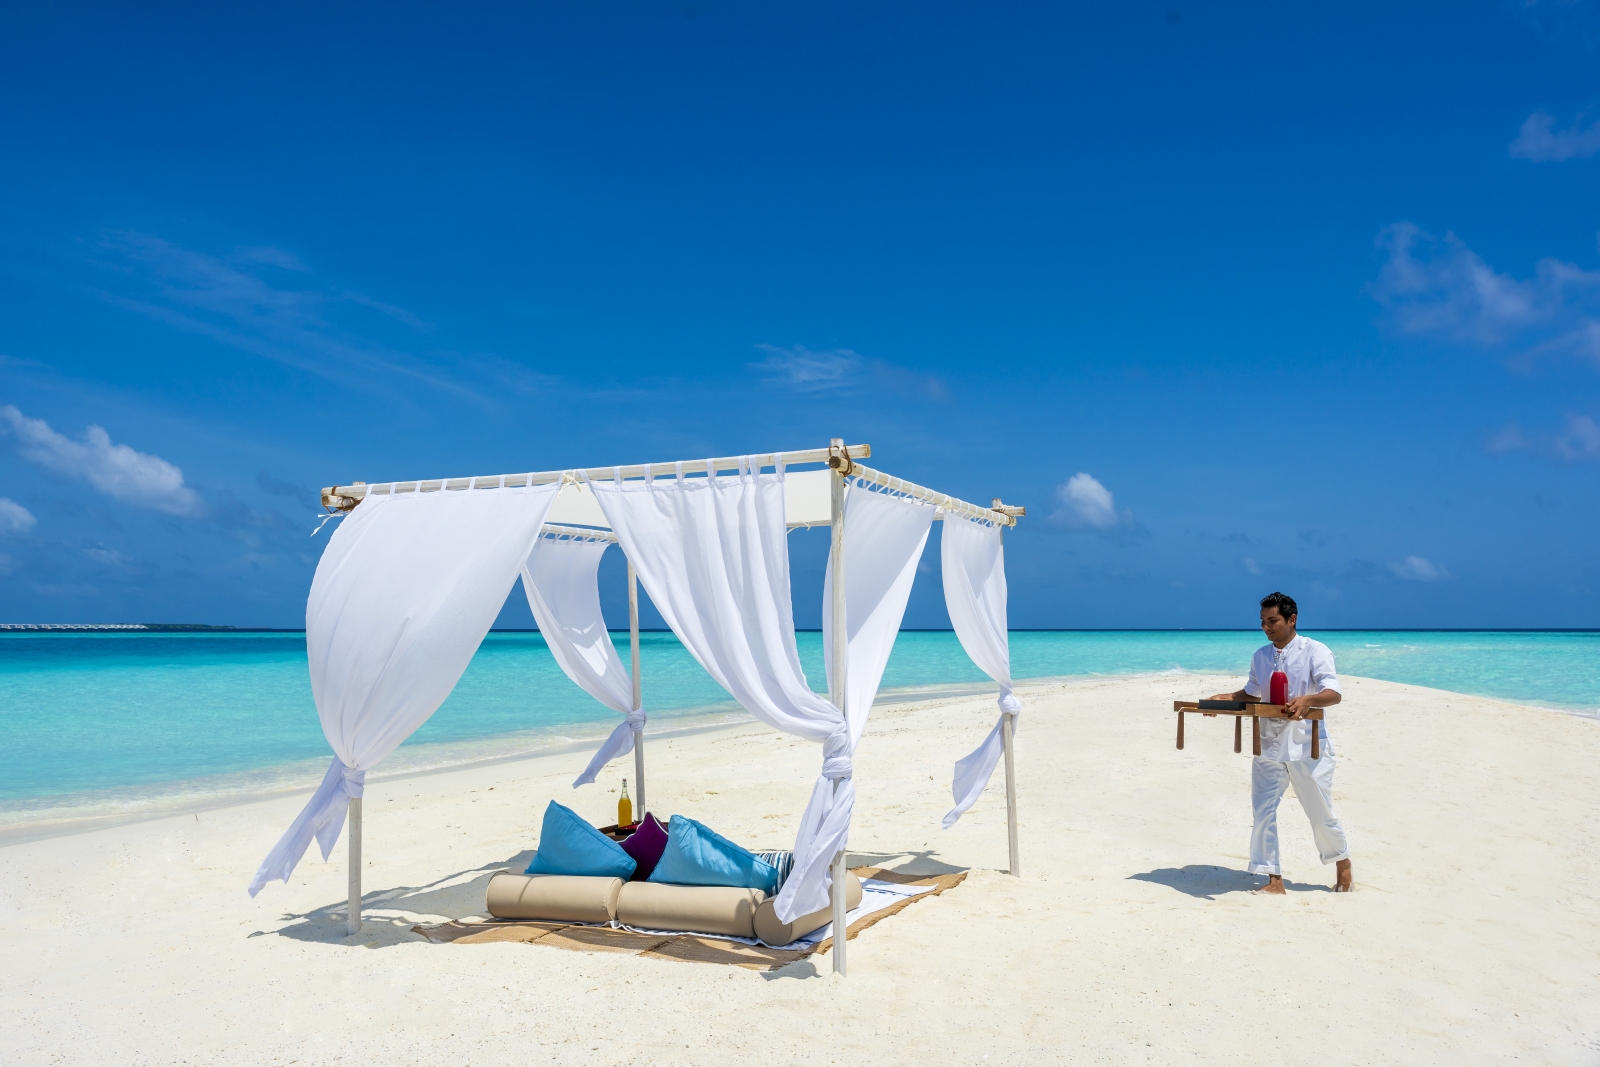 A staff member bringing fresh drinks to a private beach cabana, set on the white sand beach of Milaidhoo surrounded by the tuquoise waters of the Indian Ocean